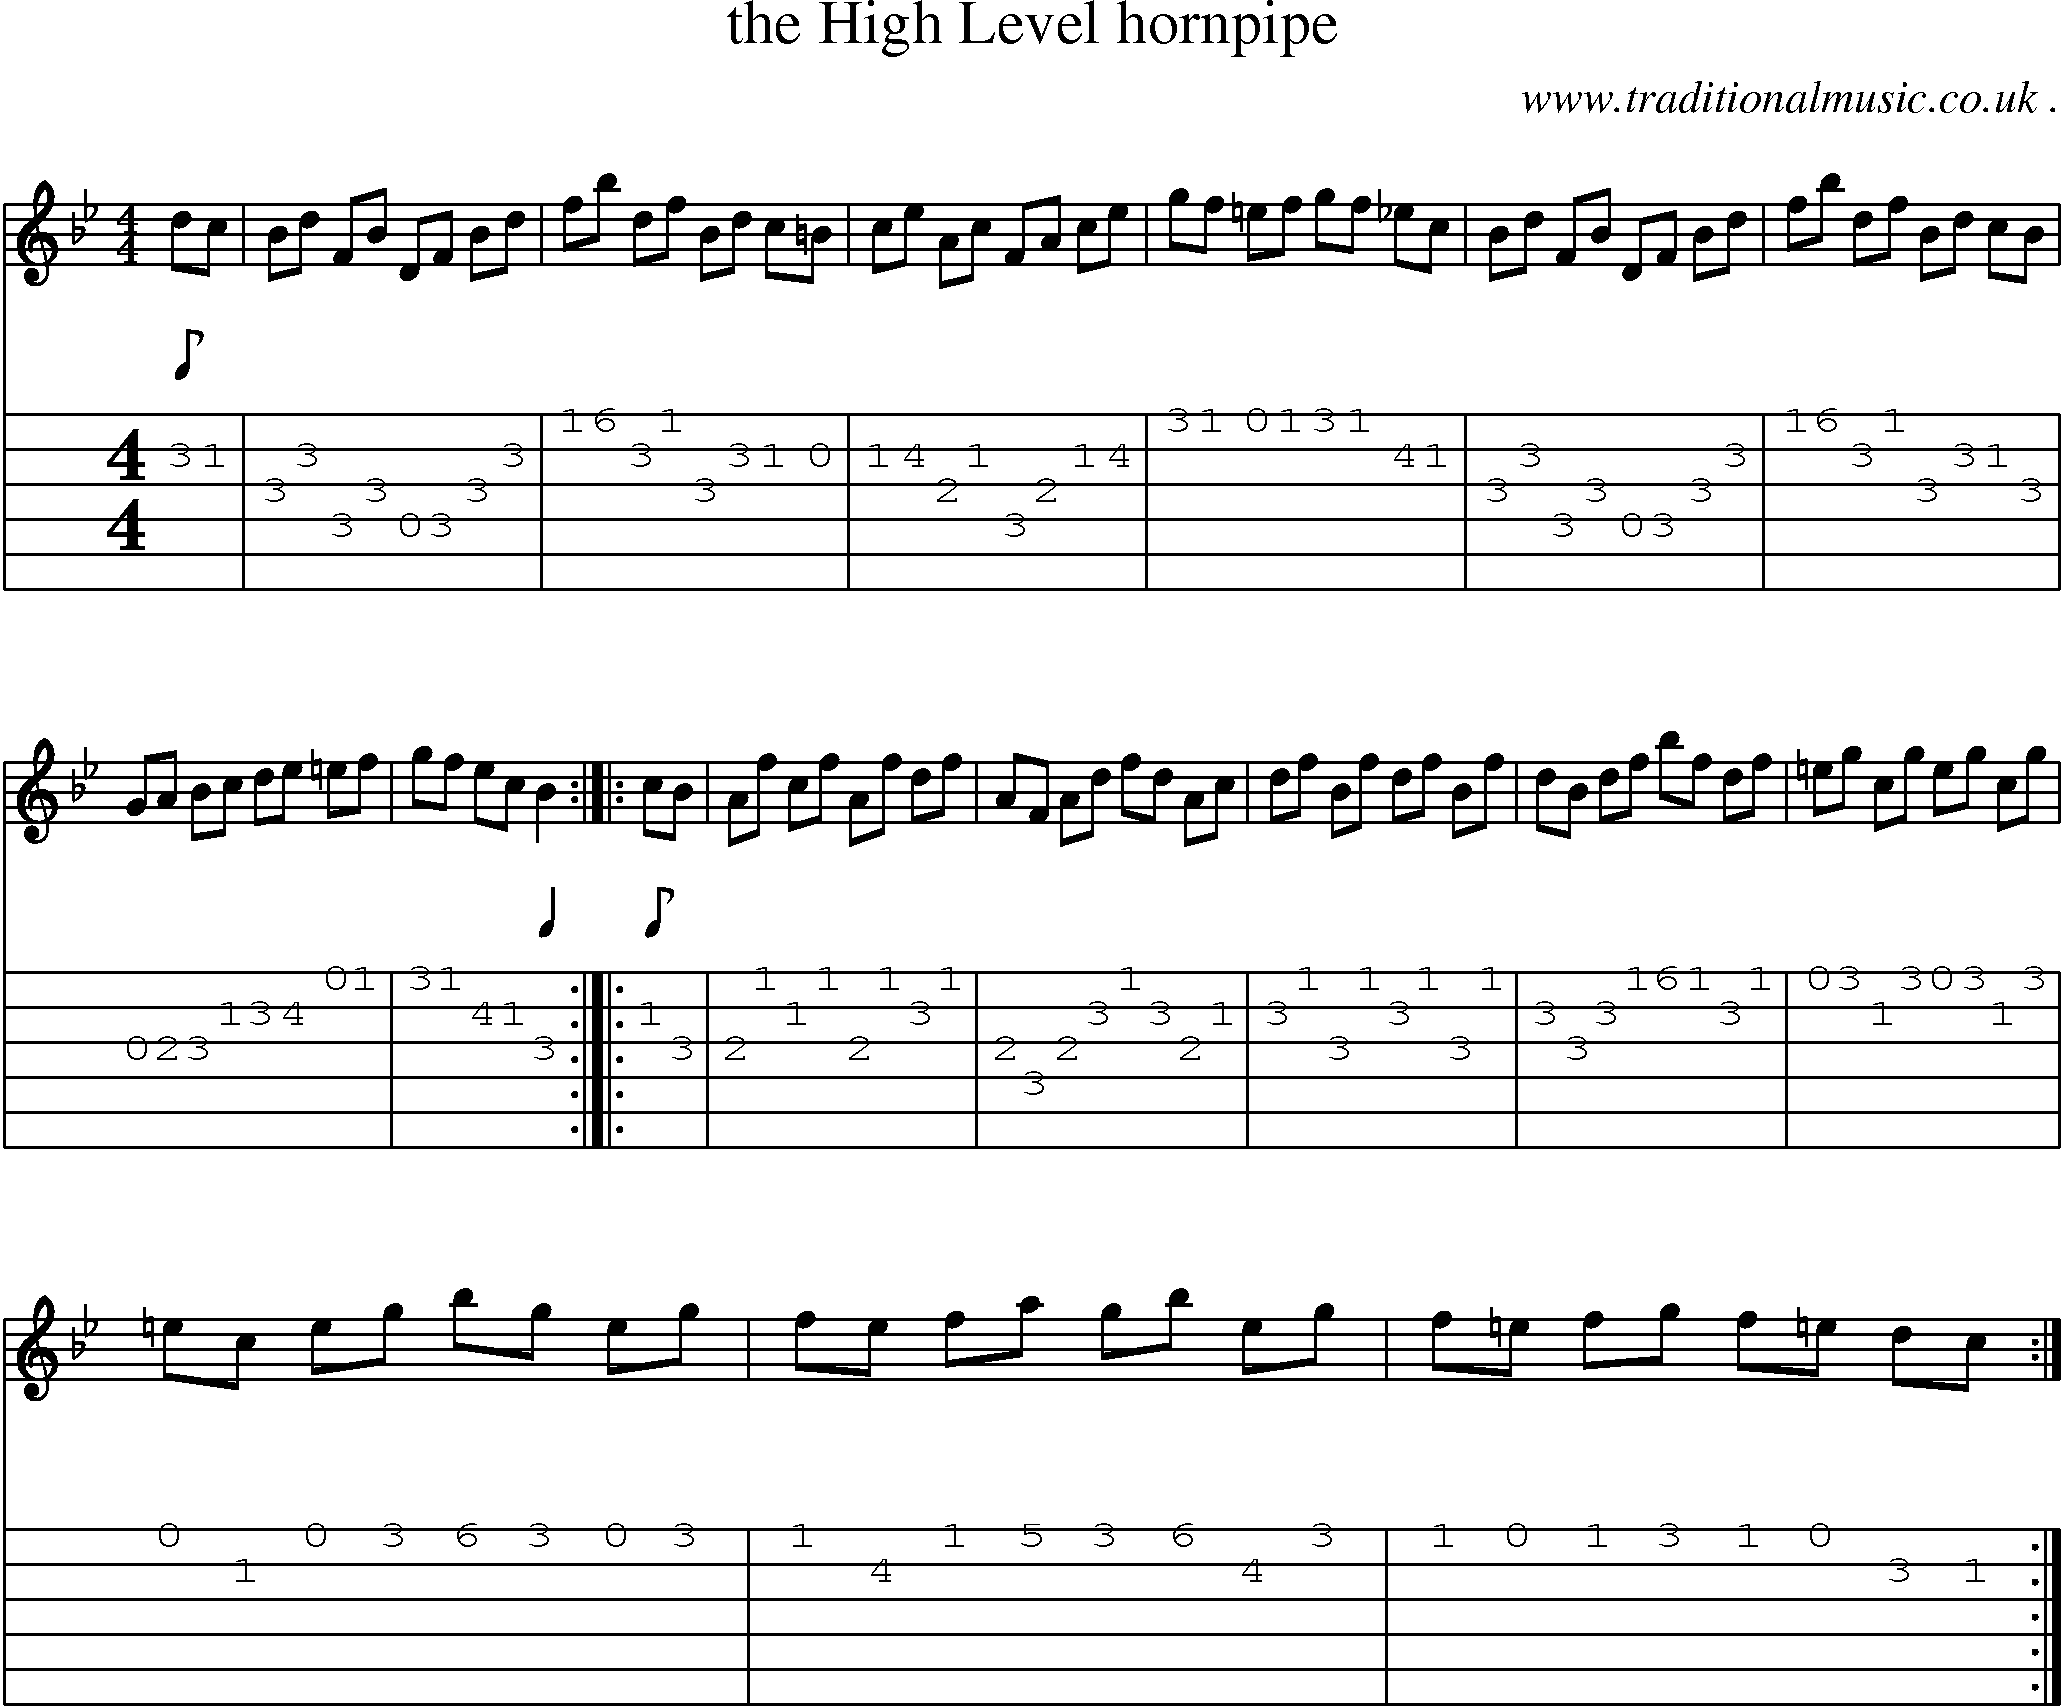 Sheet-Music and Guitar Tabs for The High Level Hornpipe